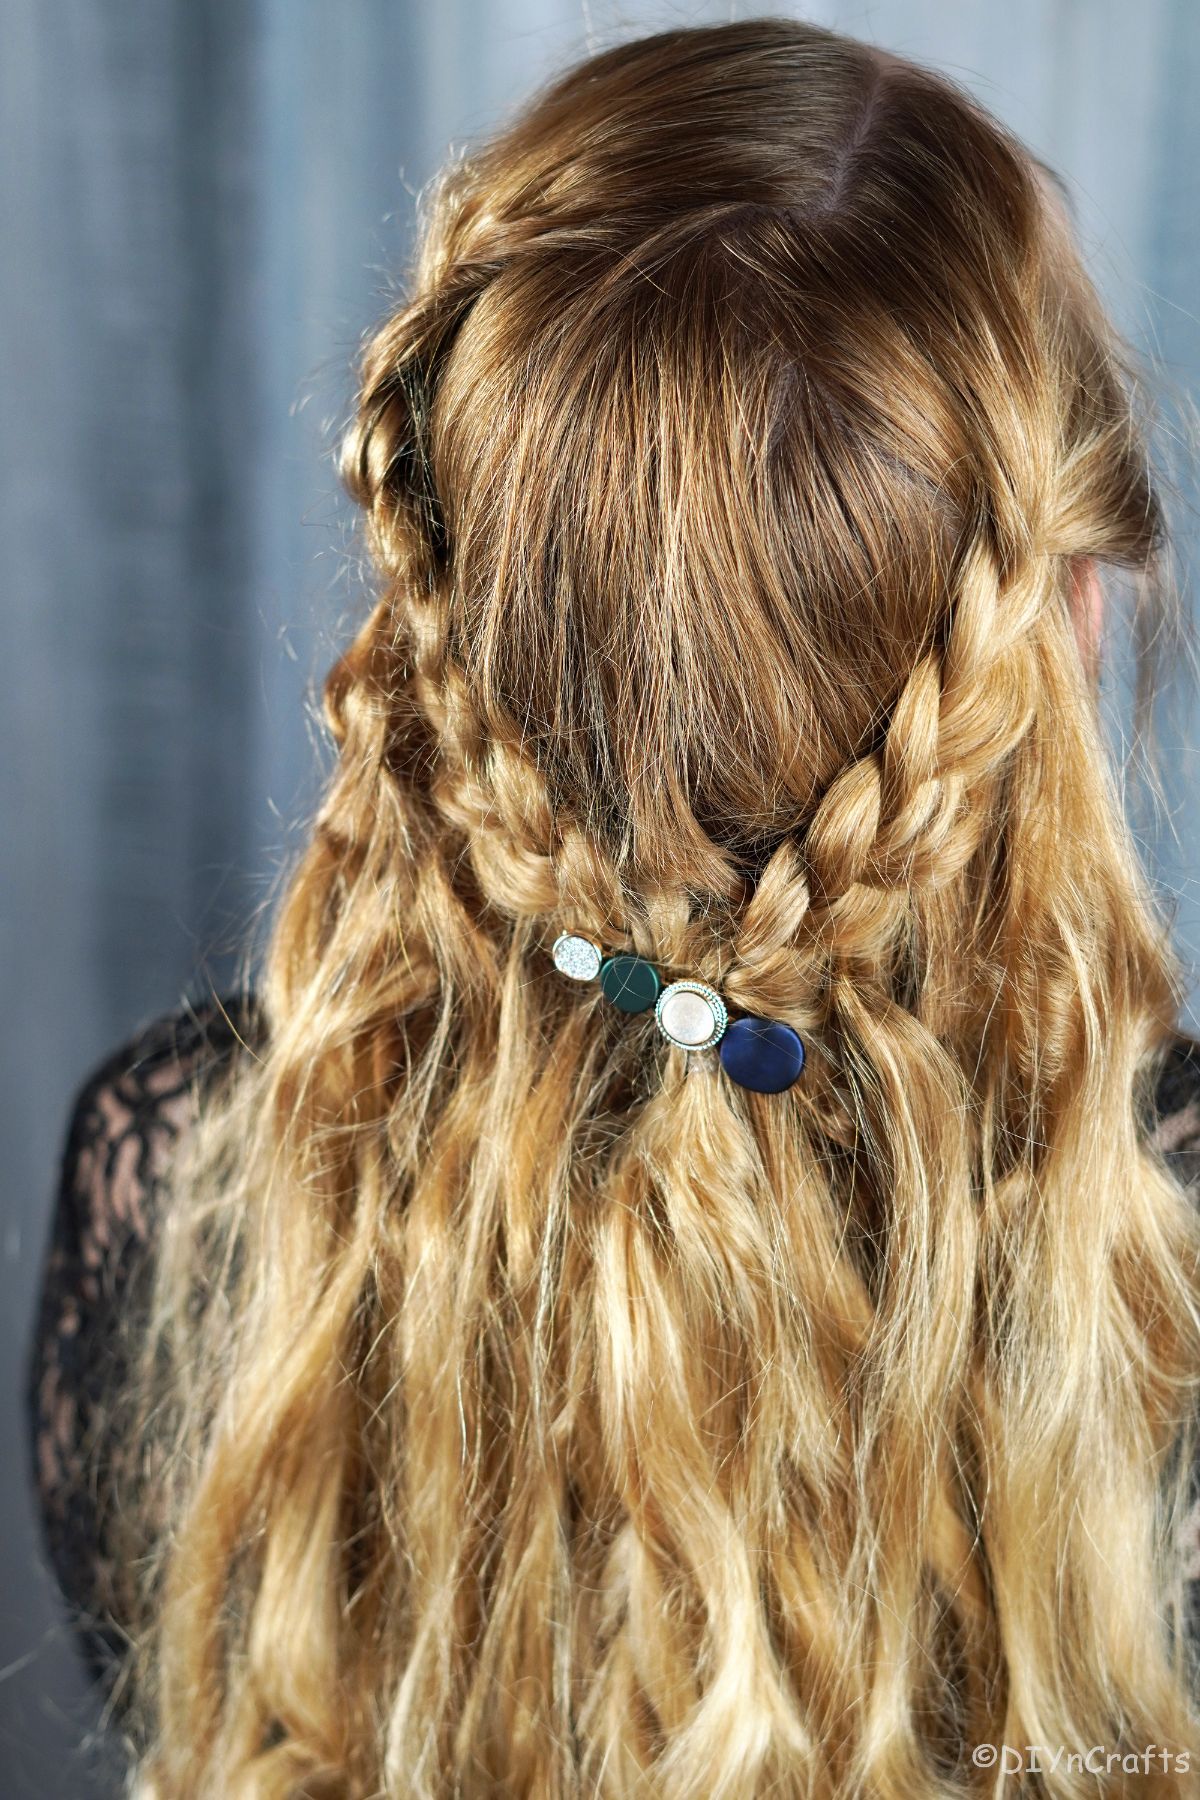 back of blonde hair with braids and decorative pin on half up hairstyle